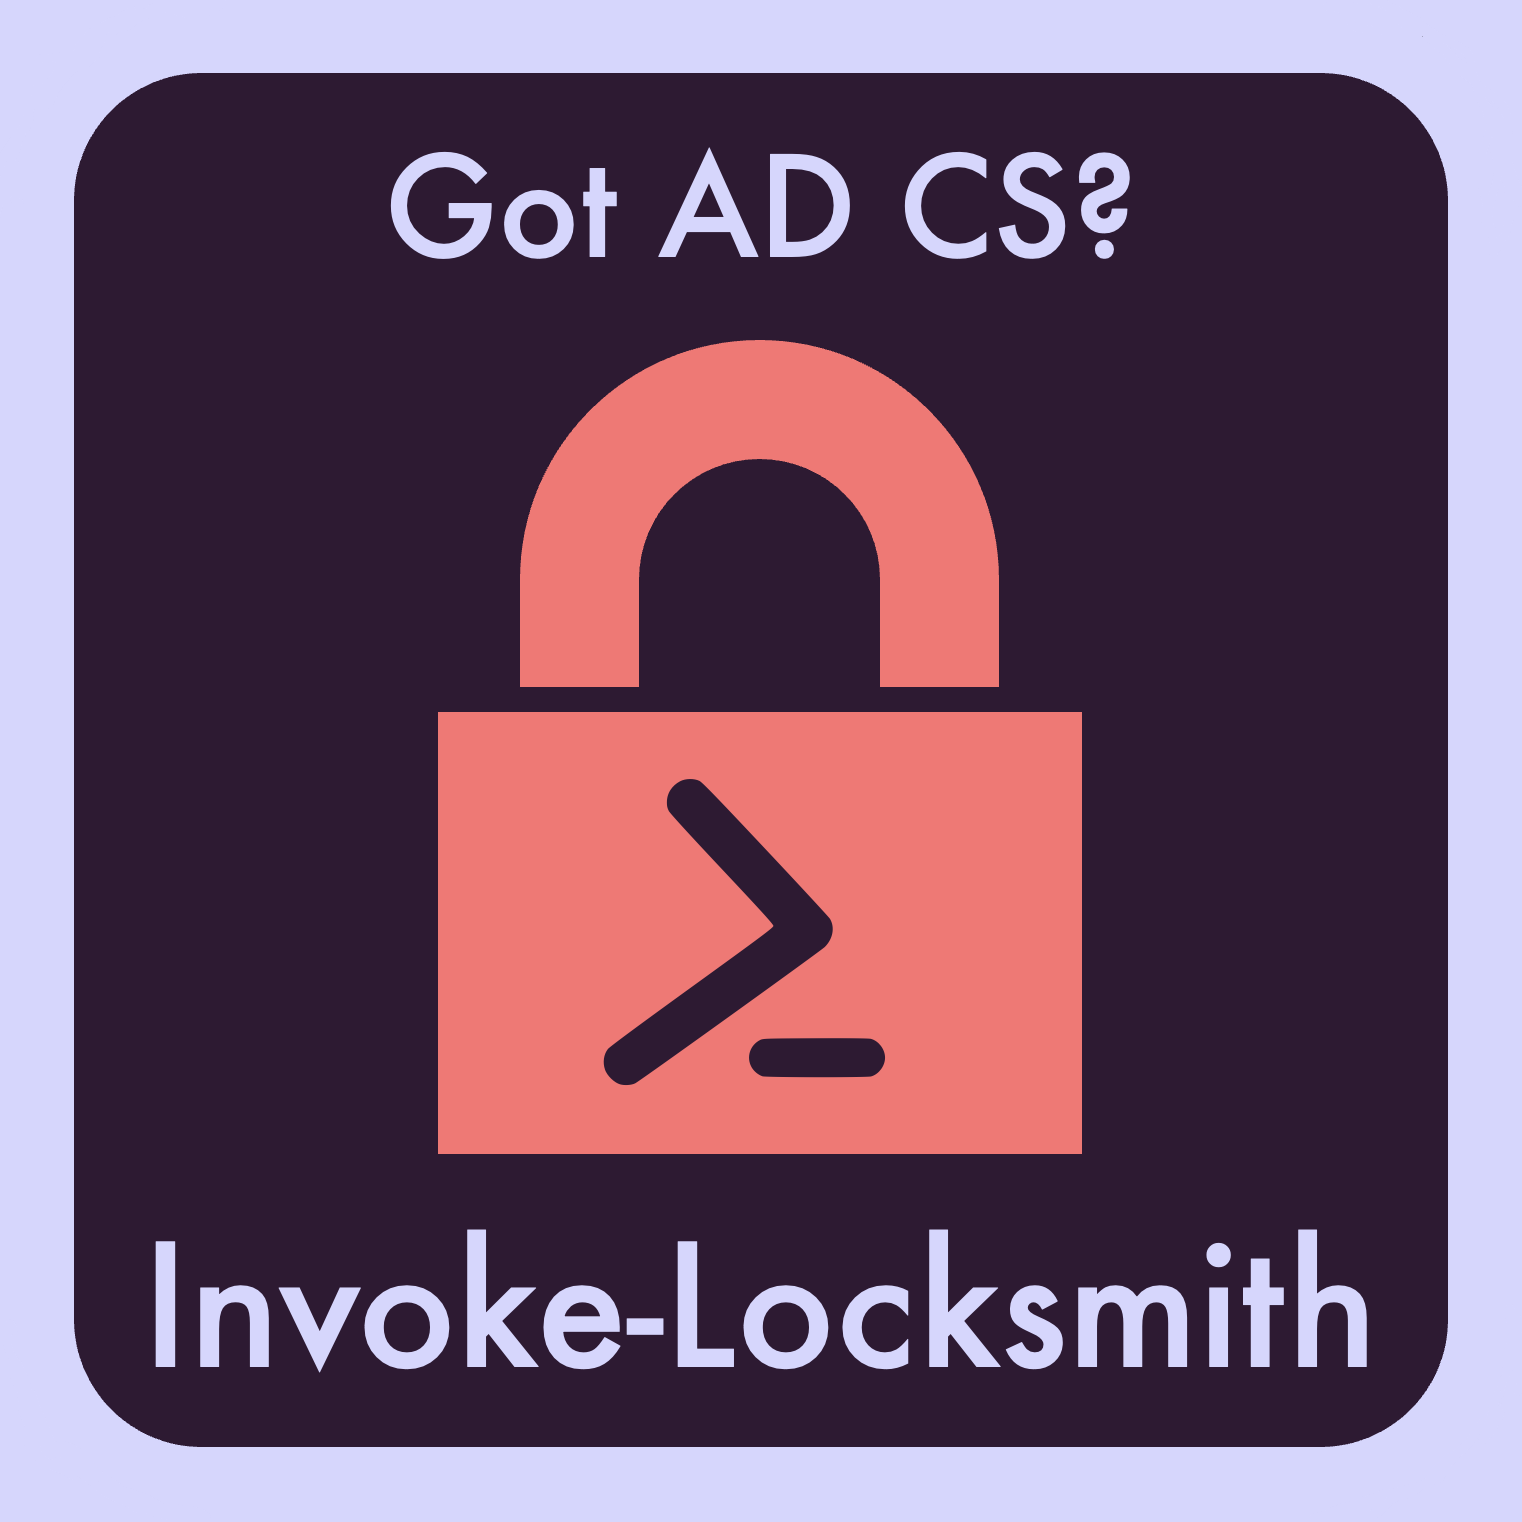 An image of the first Locksmith sticker: a coral-colored padlock with the basic PowerShell prompt characters on the front. The top caption says, 'Got AD CS?' and the bottom caption says, 'Invoke-Locksmith' on a purple background.